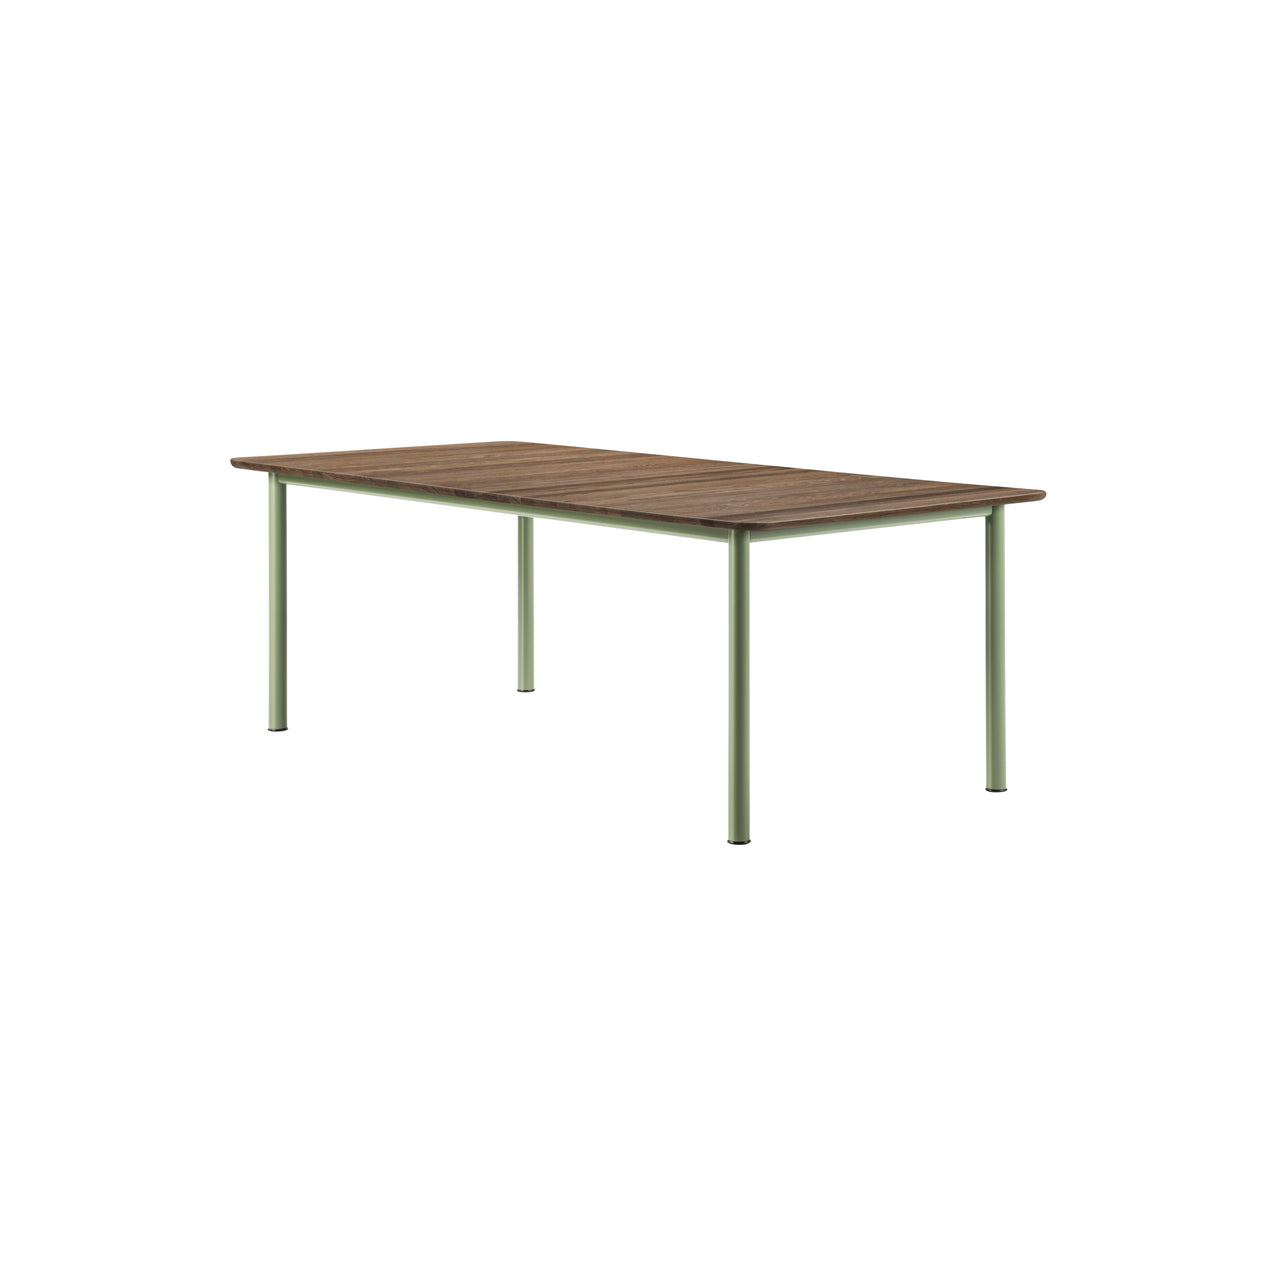 Plan Extendable Table: Smoked Oiled Oak + Modernist Green